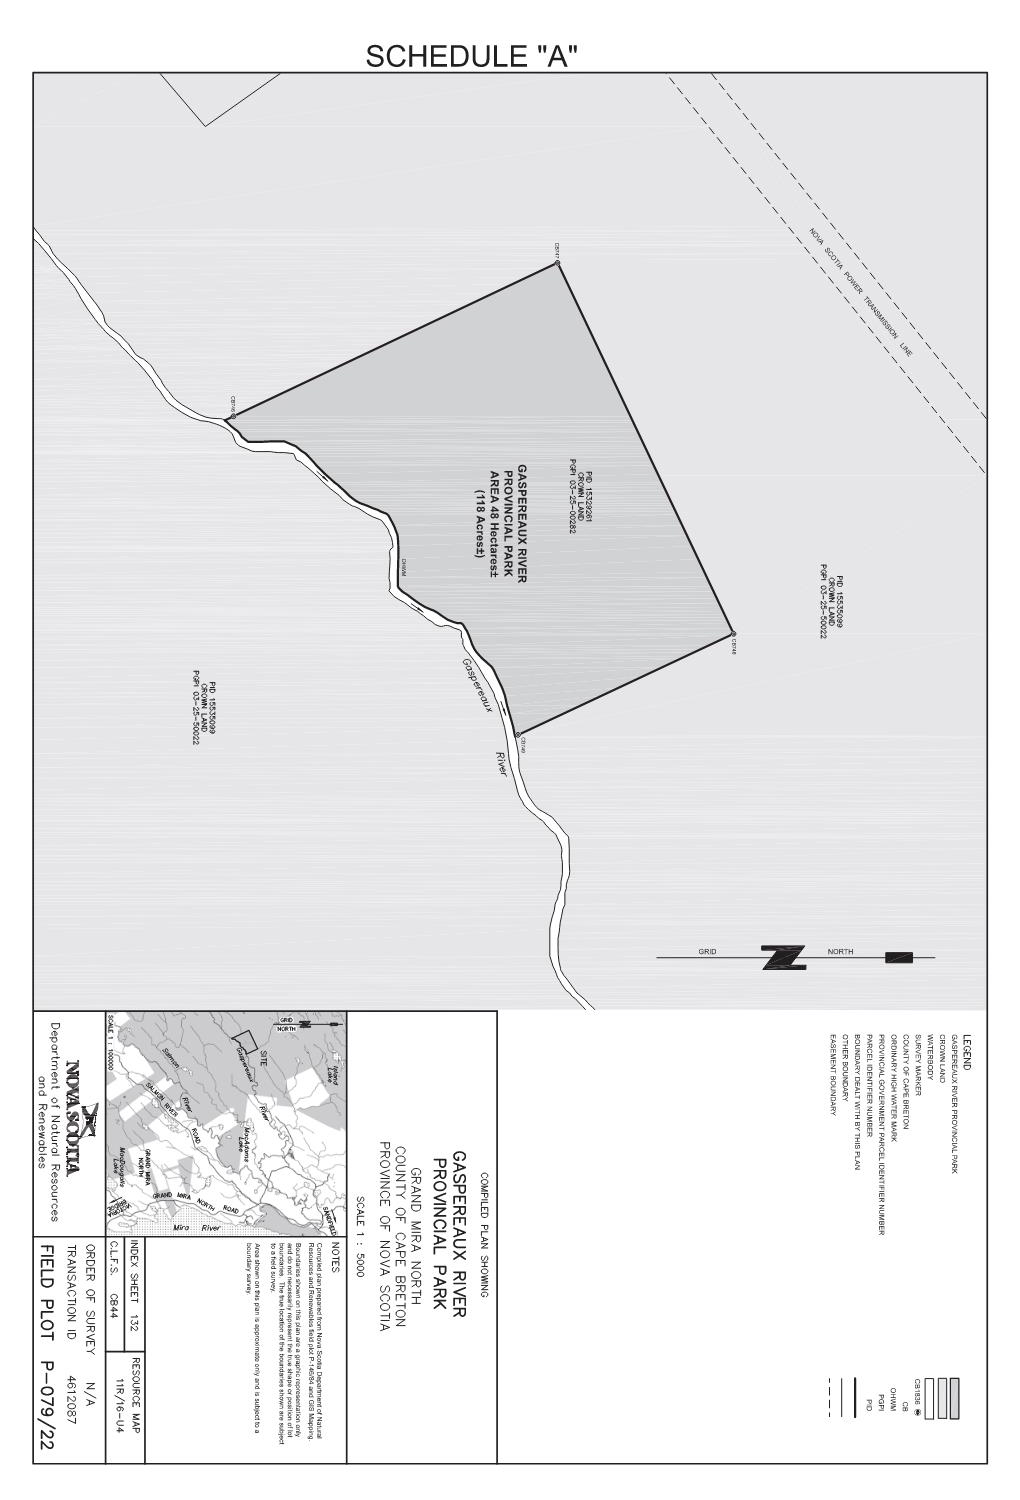 Graphic showing map of Gaspereaux River Provincial Park